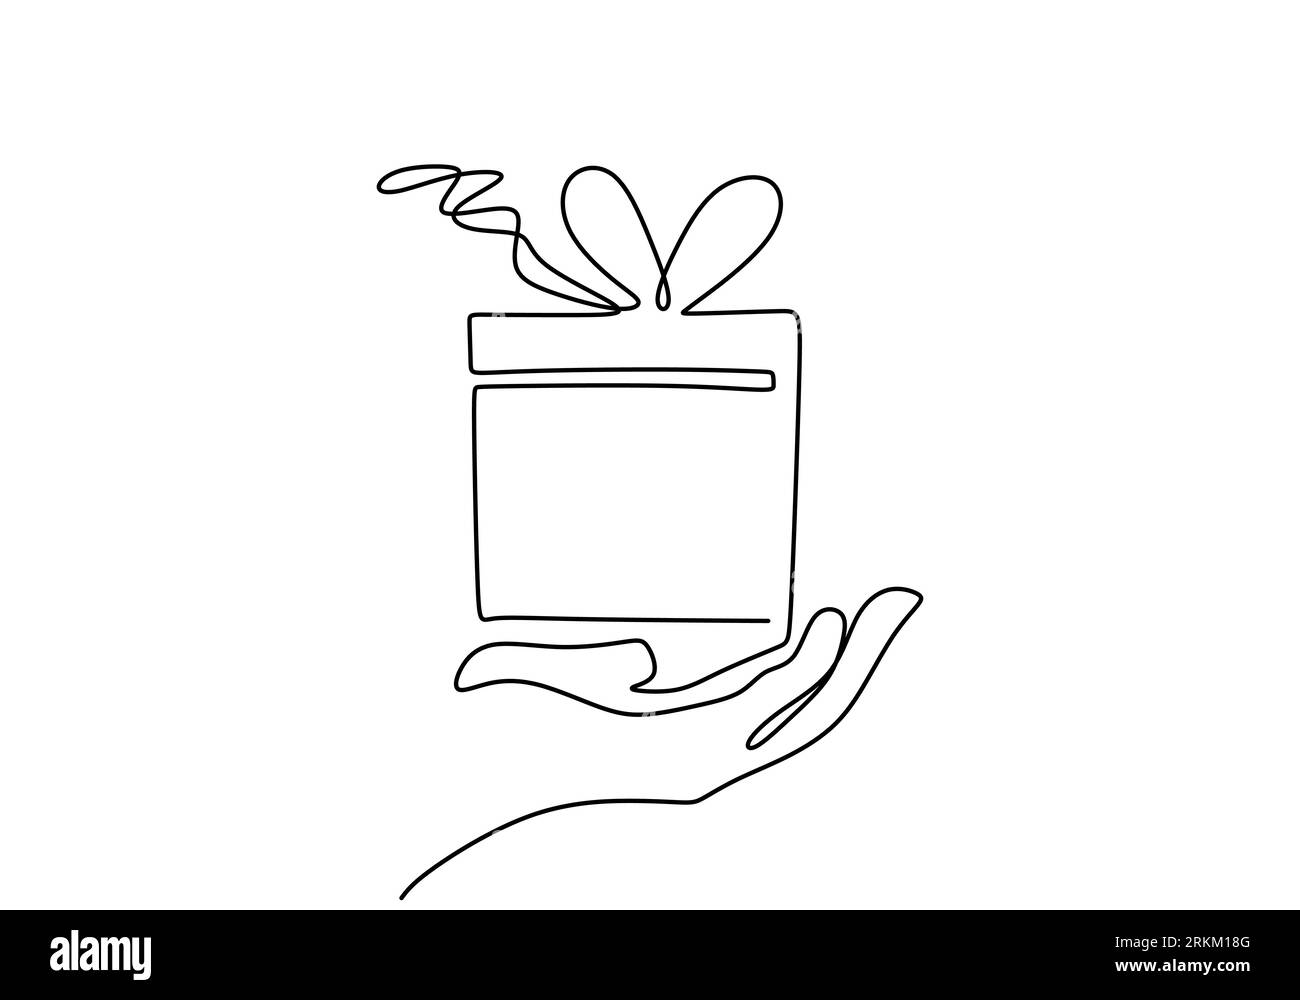 https://c8.alamy.com/comp/2RKM18G/hand-holding-gift-box-continuous-line-drawing-one-hand-drawn-minimalist-vector-illustration-isolated-on-white-background-2RKM18G.jpg